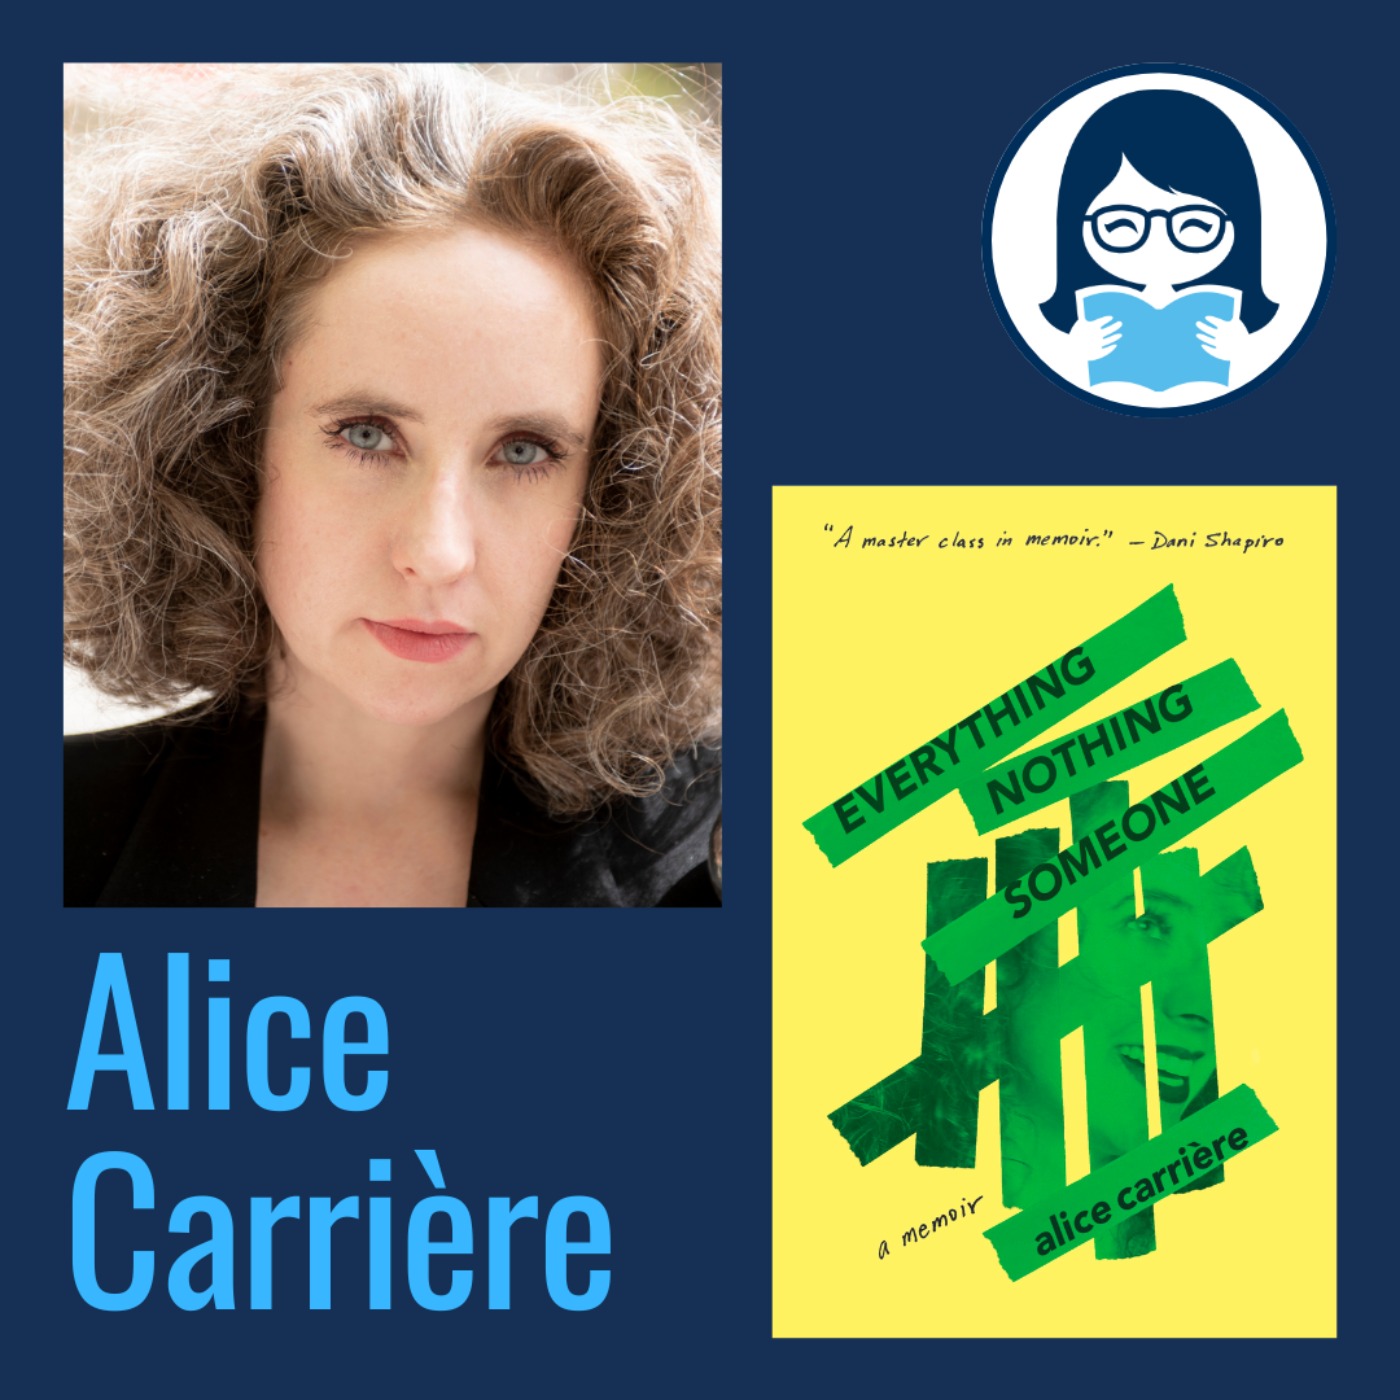 Alice Carrière, EVERYTHING NOTHING SOMEONE: A Memoir